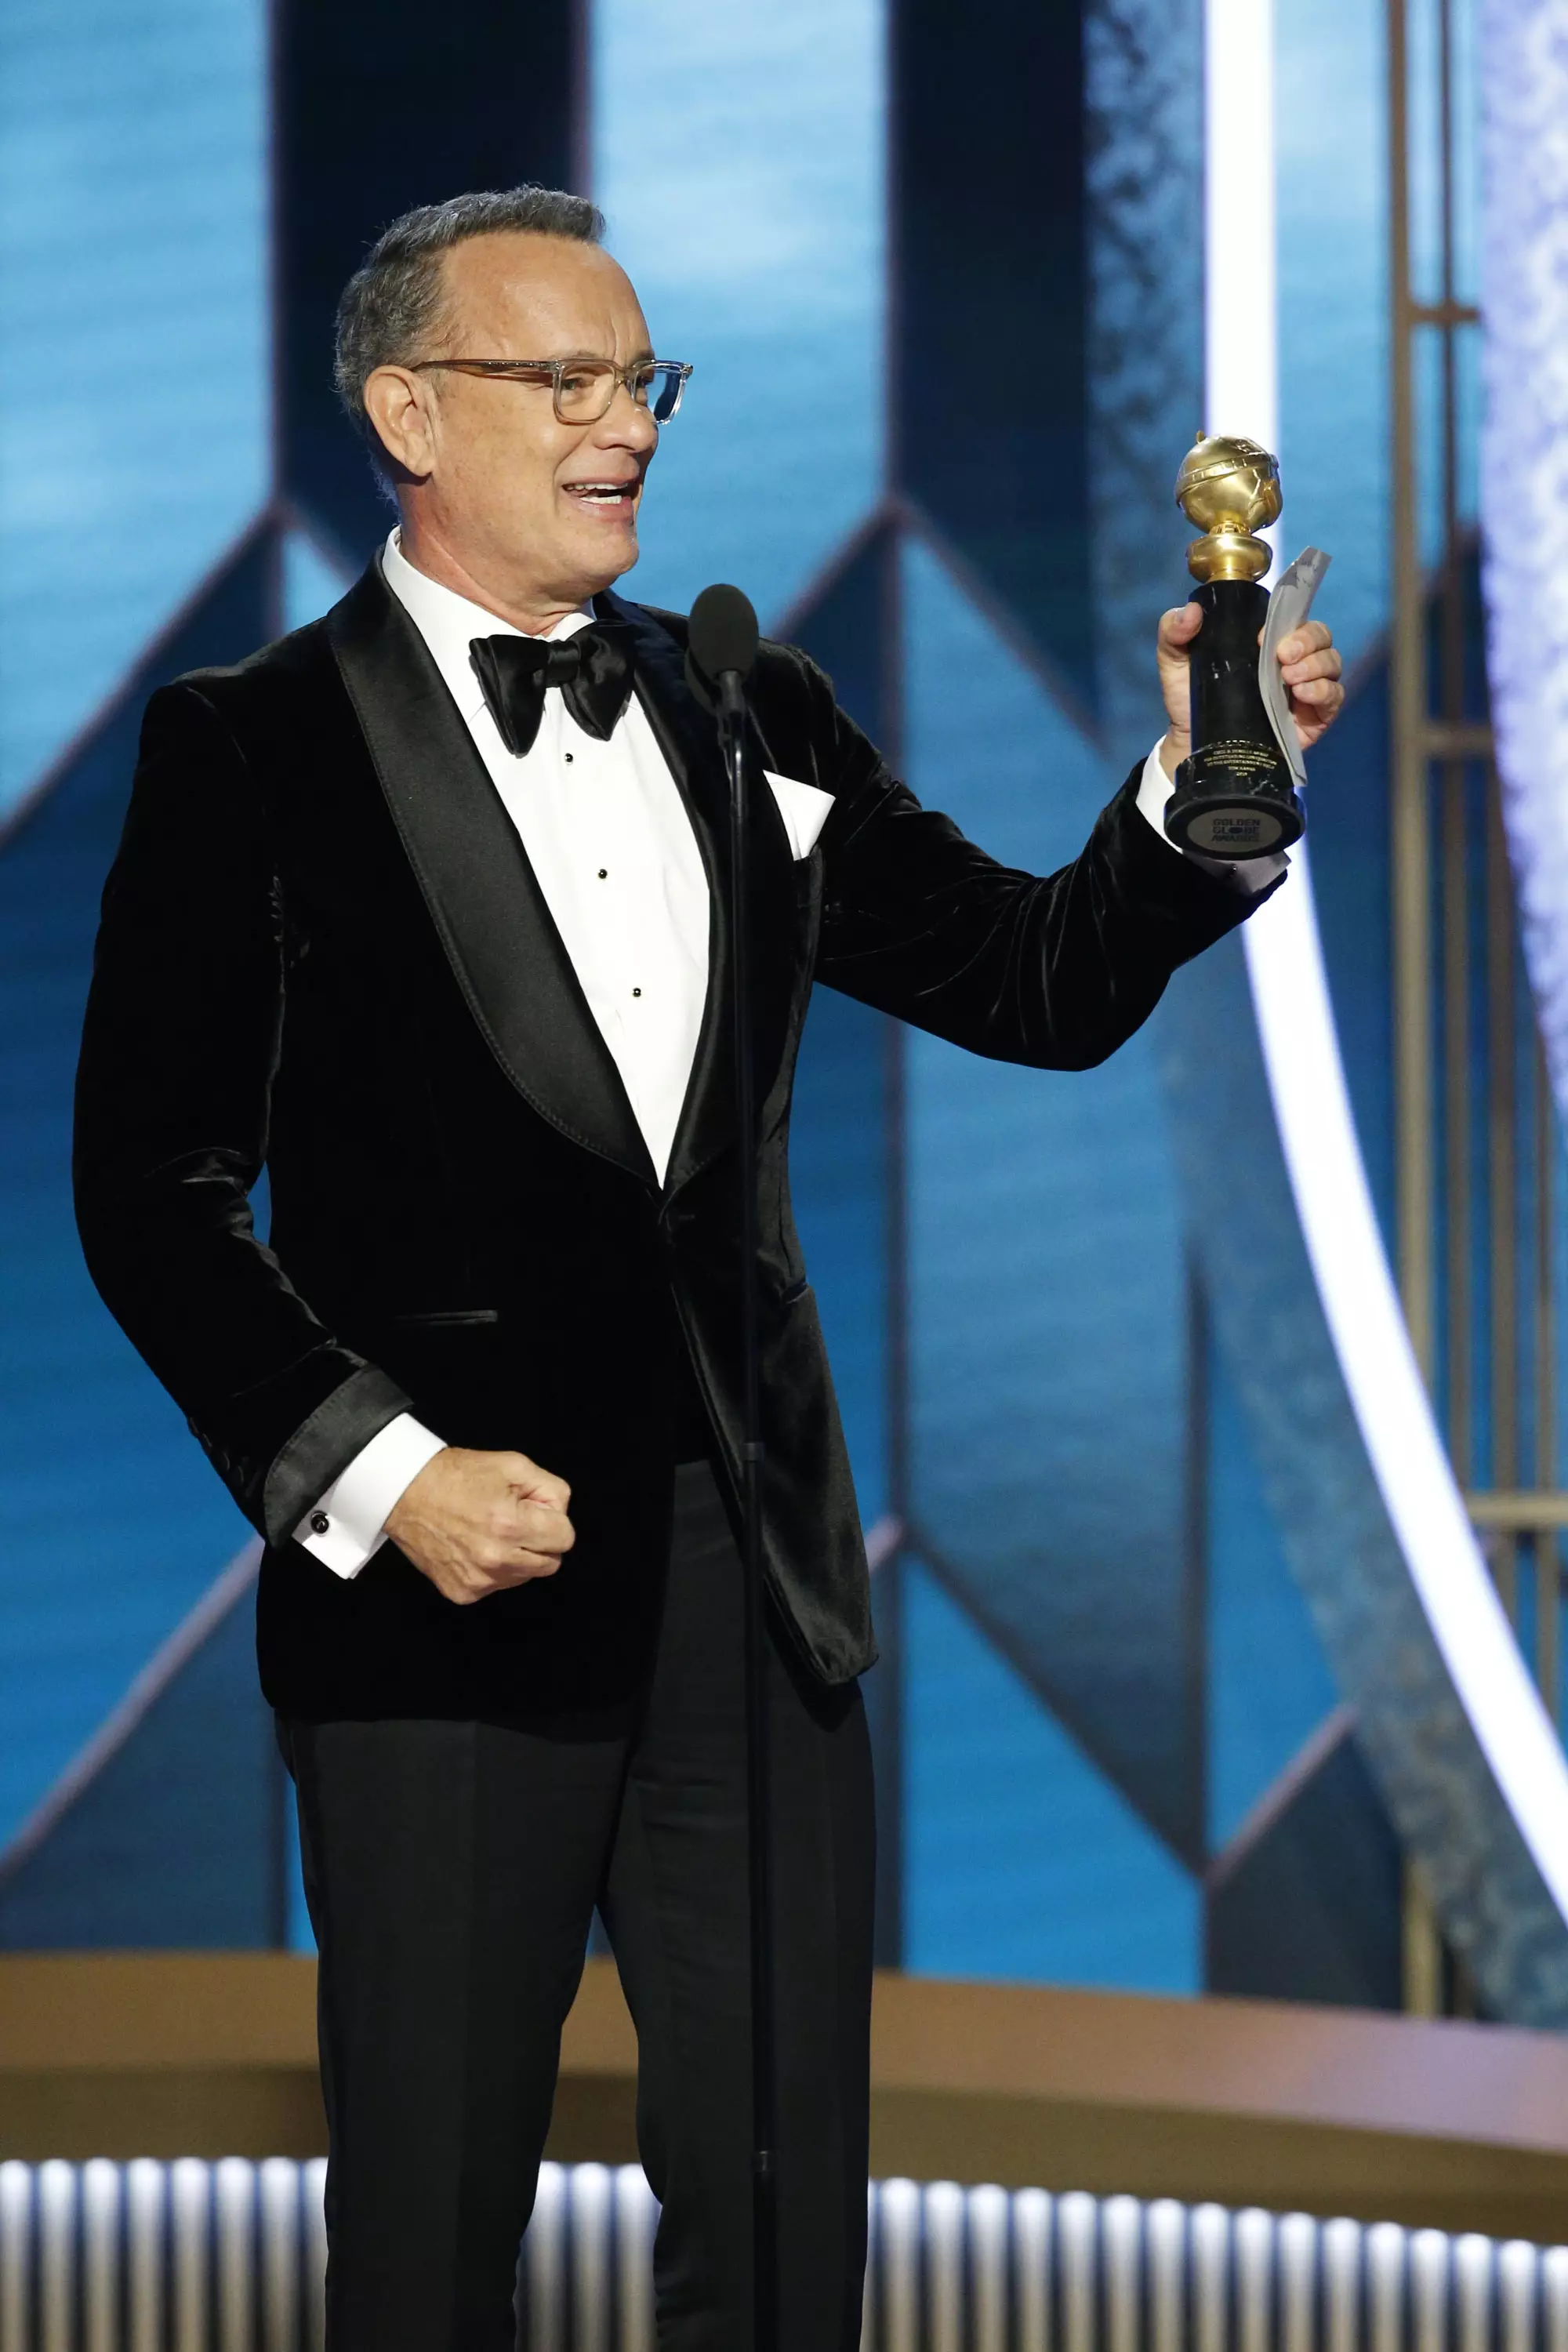 He was awarded the Cecil B. DeMille Lifetime Achievement Award at the Golden Globes.